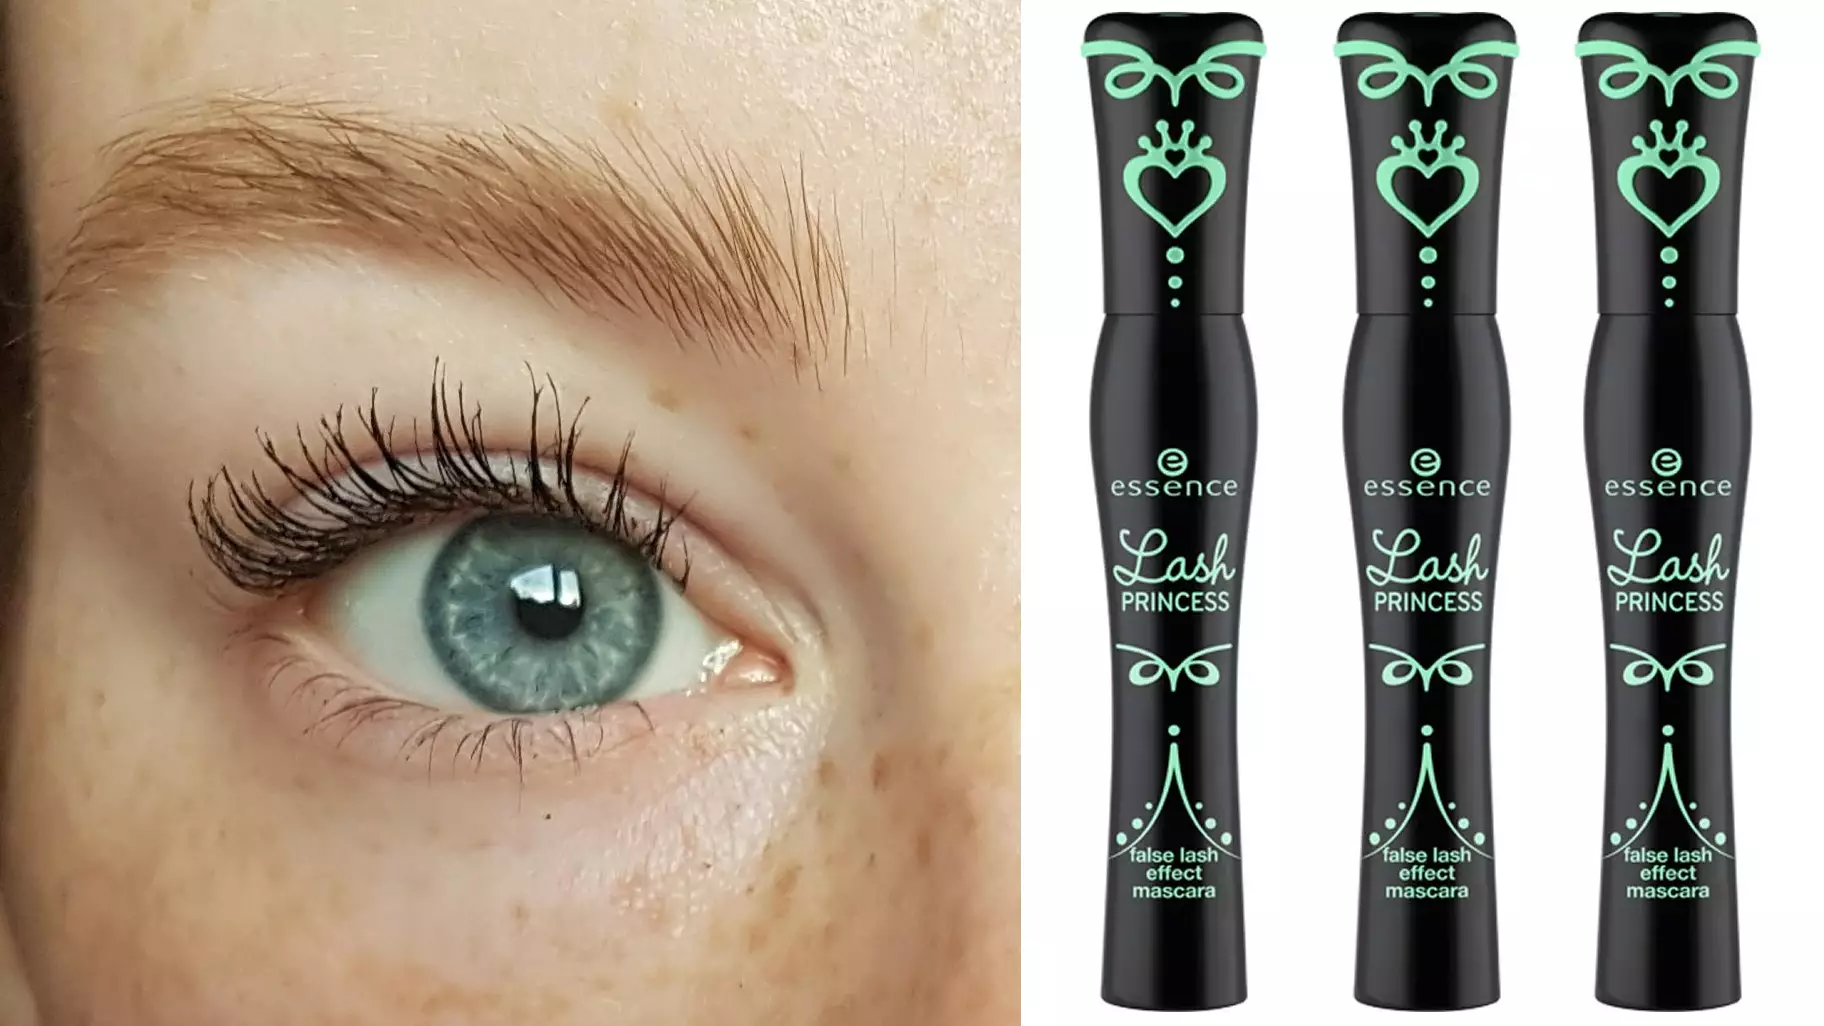 Reddit Users Are Raving About This £3.30 Mascara From Wilko